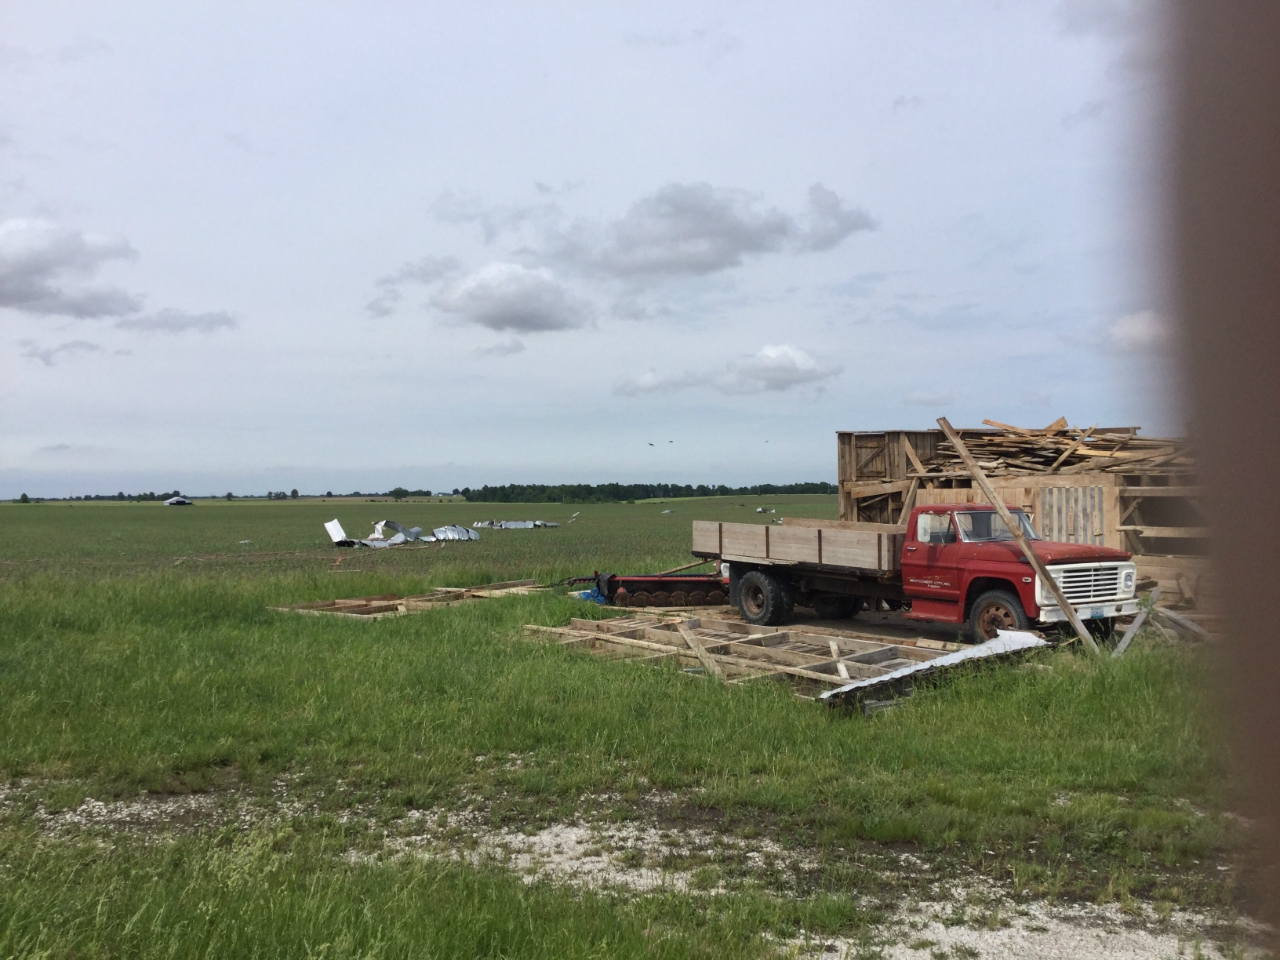 Photo of small farm outbuilding destroyed on Richard Road just south of intersection with Manley Road.